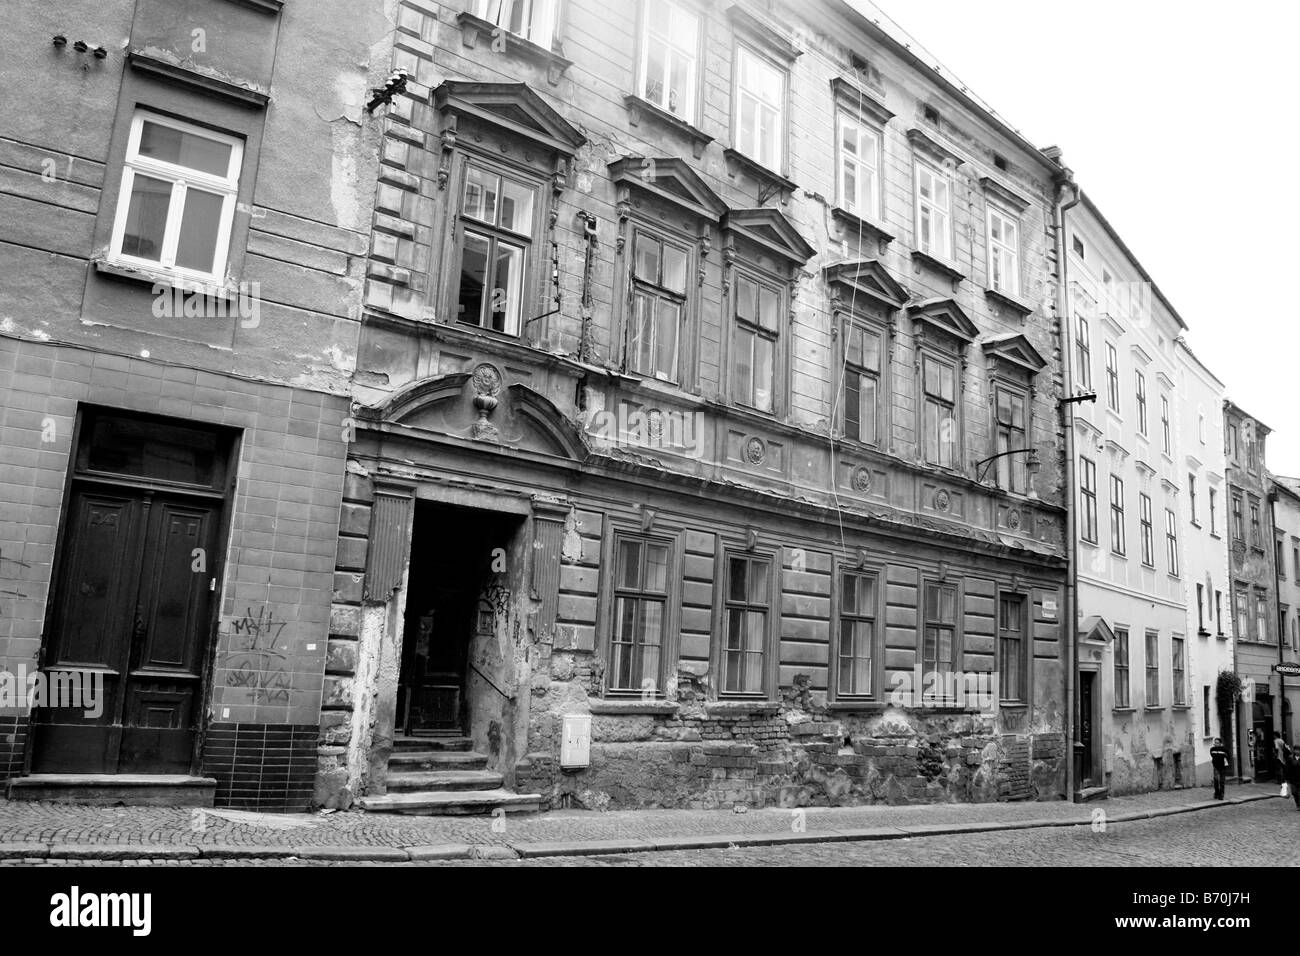 Row of old buildings in black and white, Prague, Czech Republic. Stock Photo